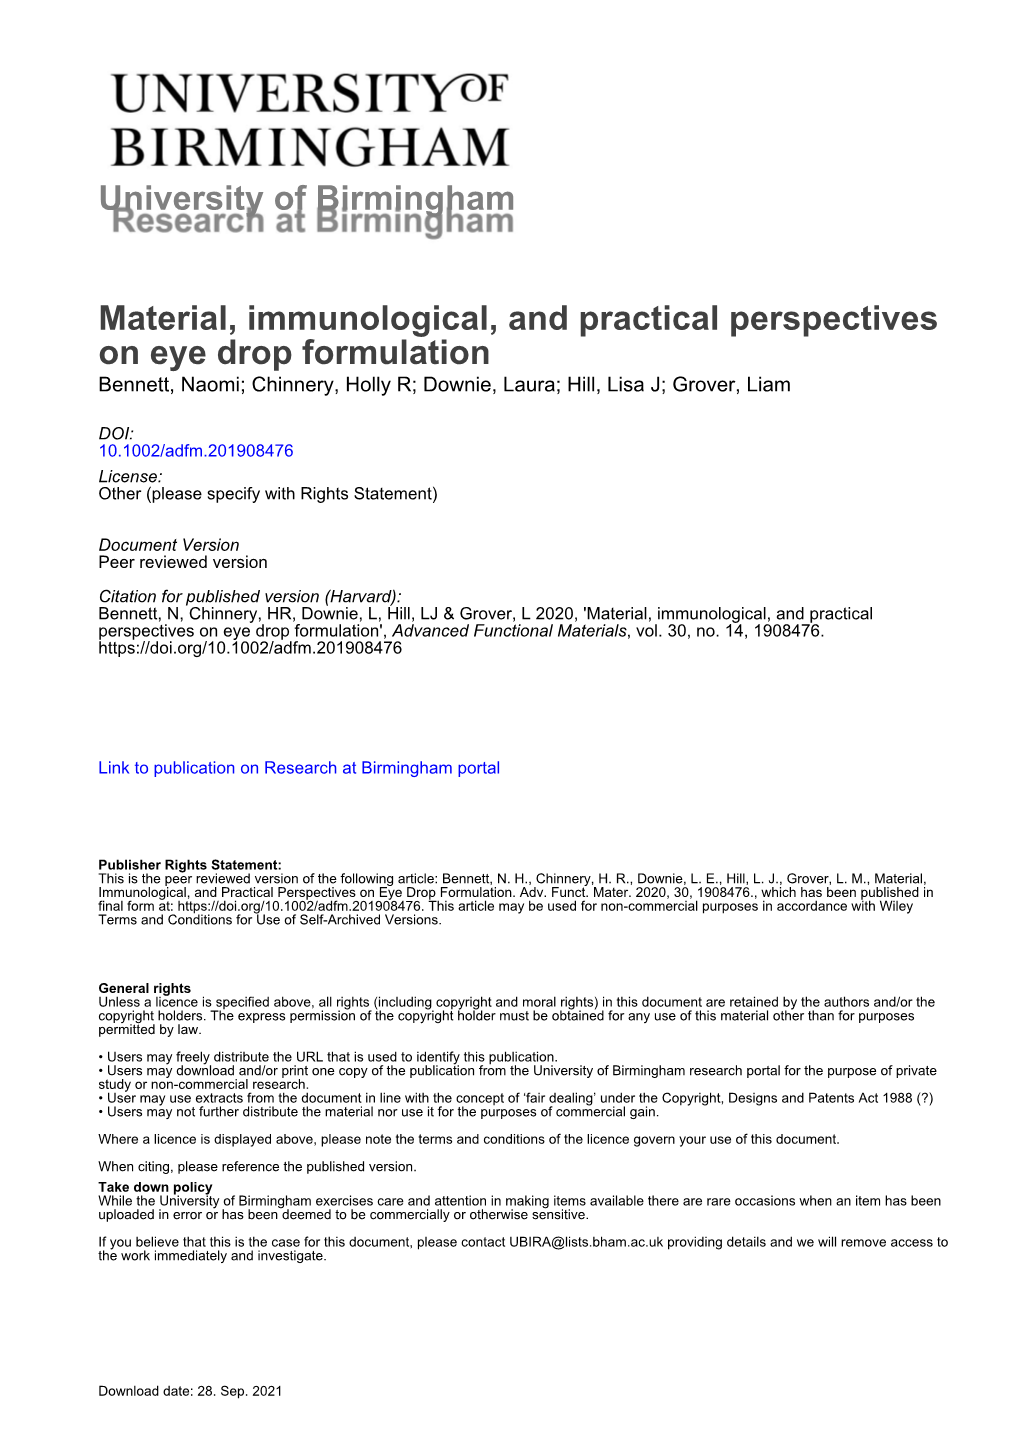 University of Birmingham Material, Immunological, and Practical